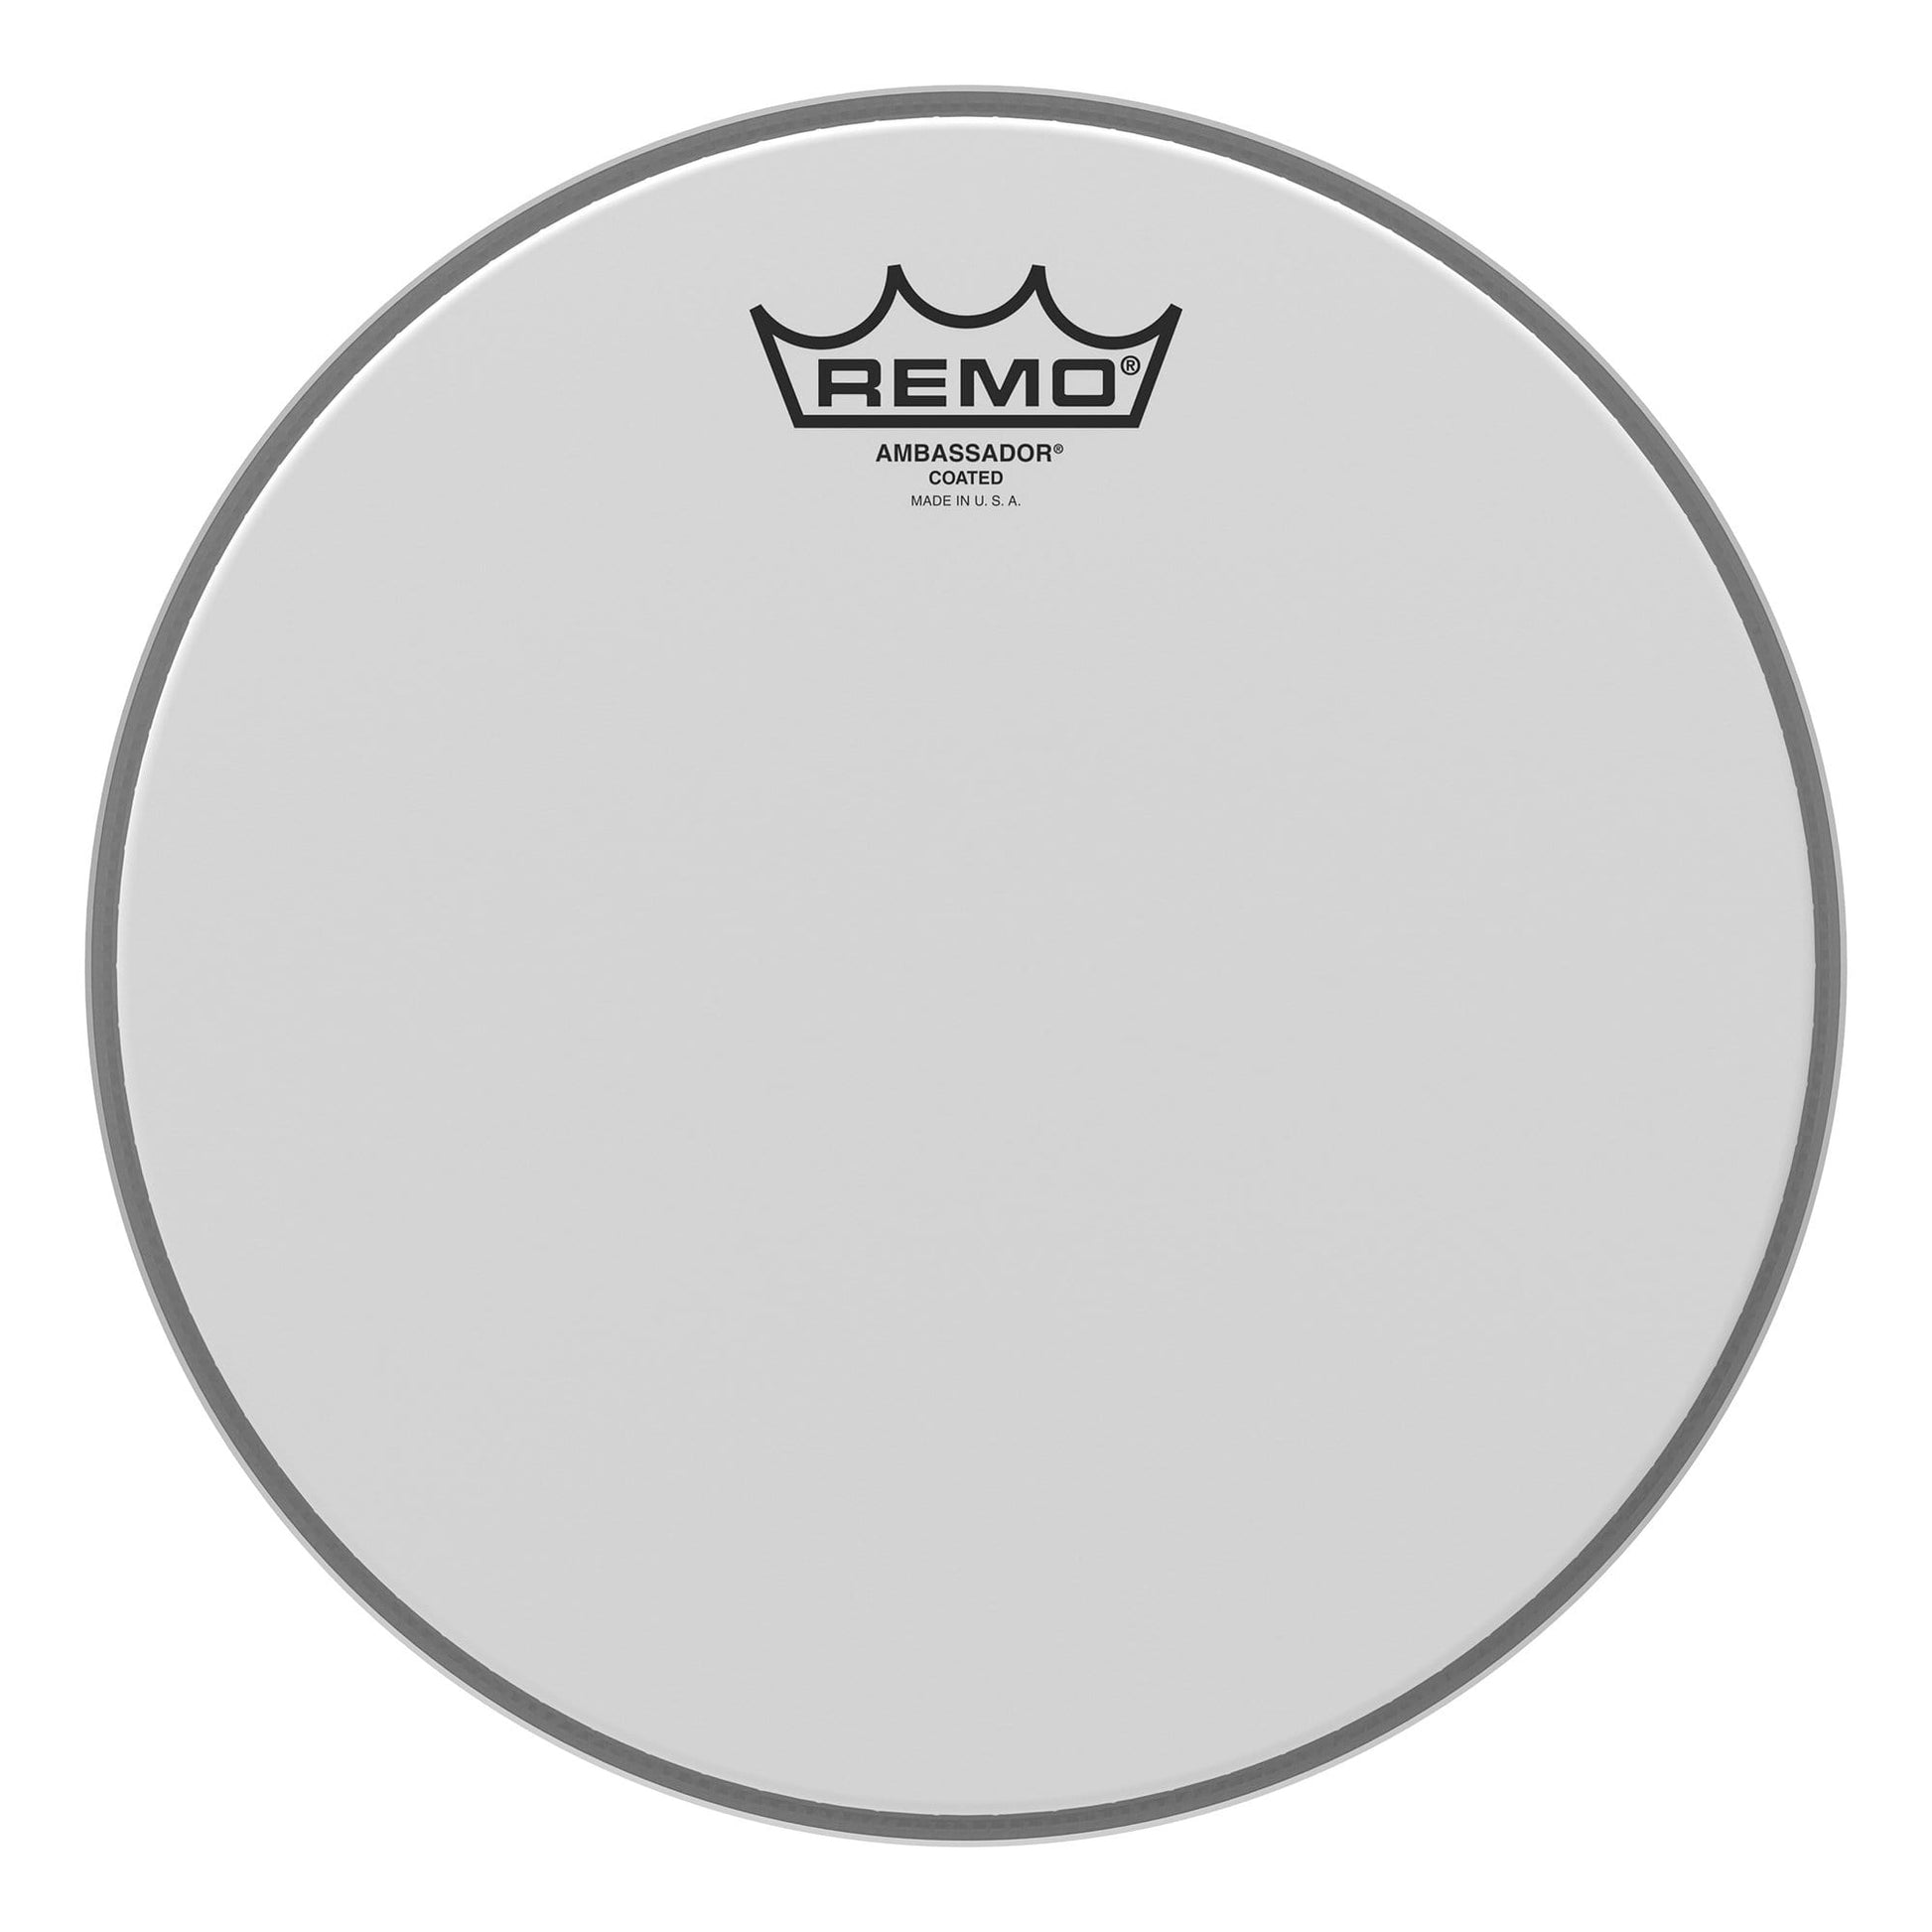 Remo 10" Ambassador Coated Drumhead Drums and Percussion / Parts and Accessories / Heads